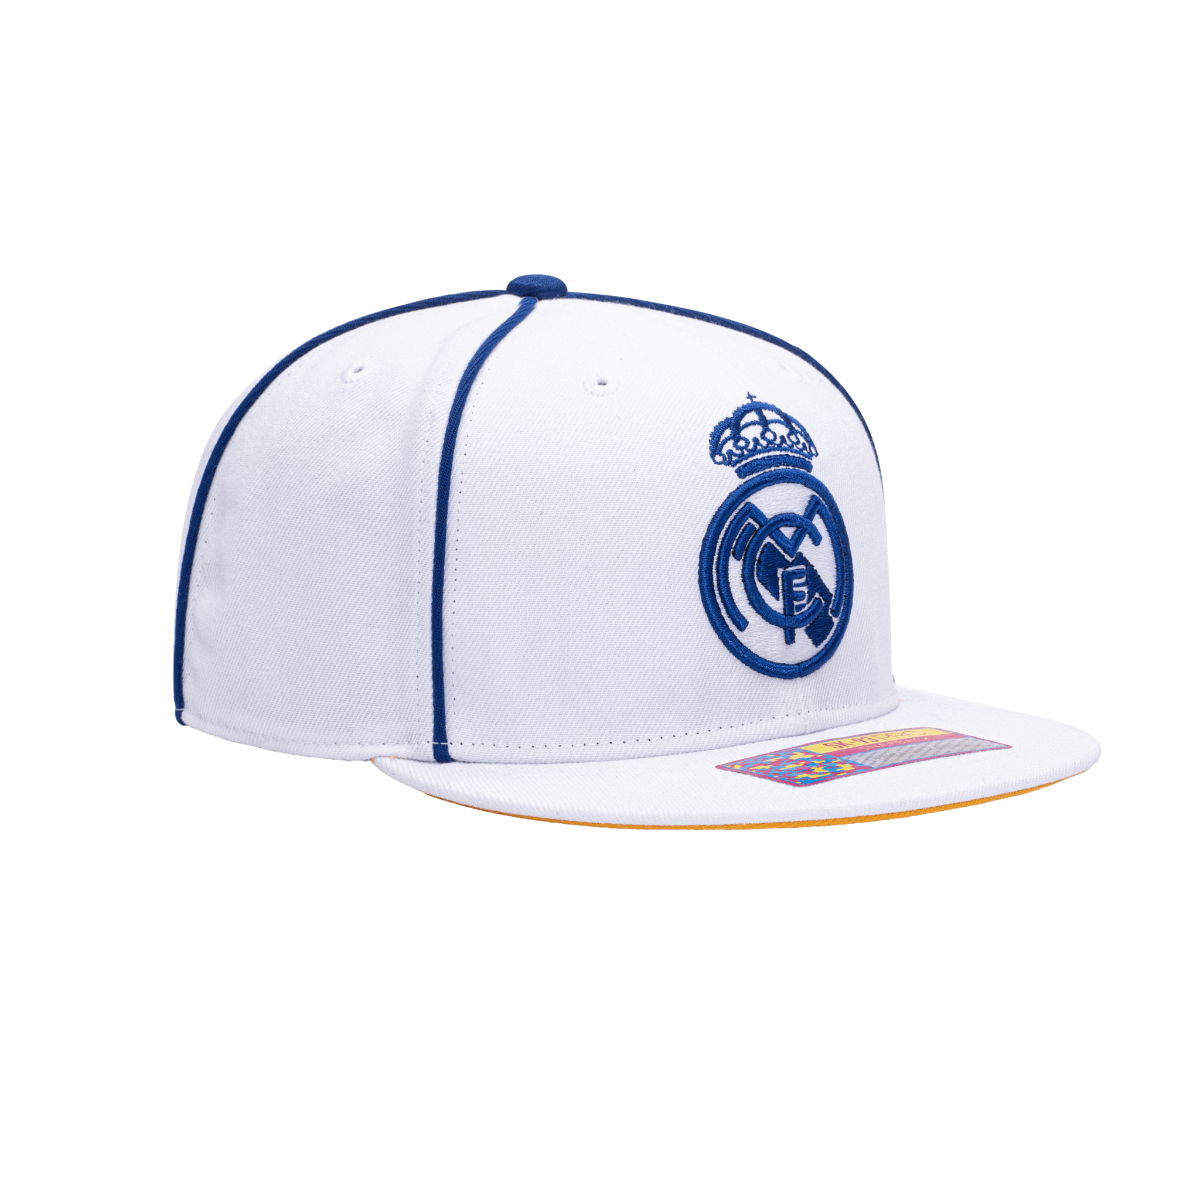 FI Collection Real Madrid Cali Day Snapback Hat - White-Blue (Diagonal 2)